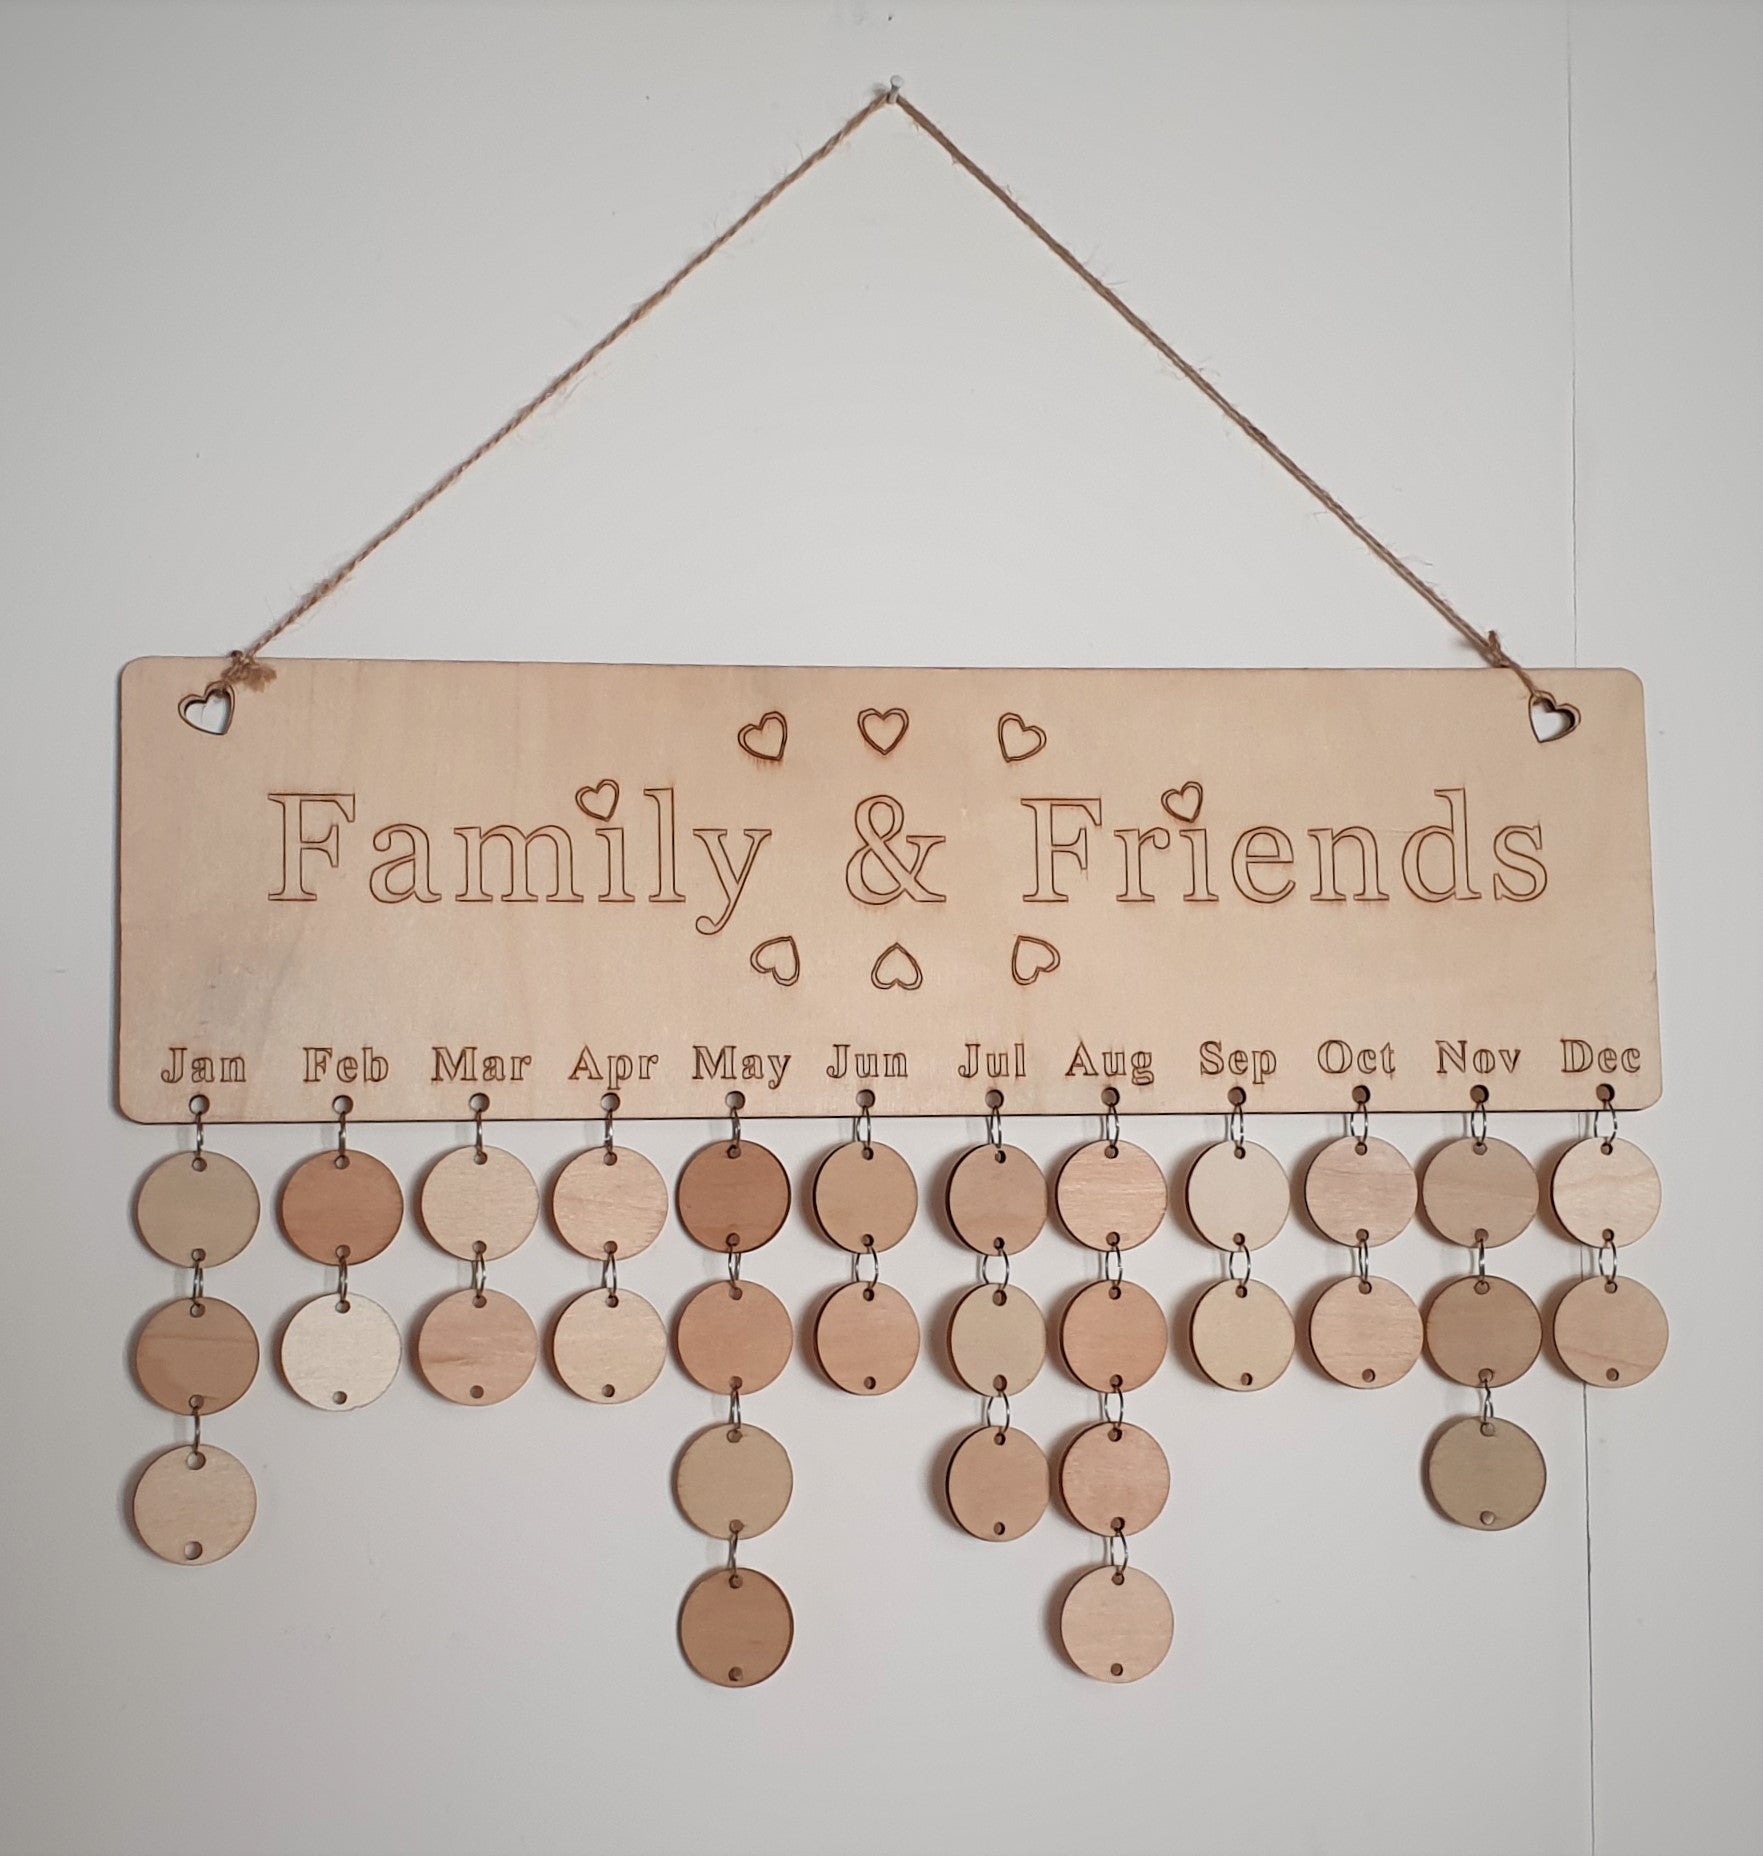 Family and Friends Special Dates Hanging Board.